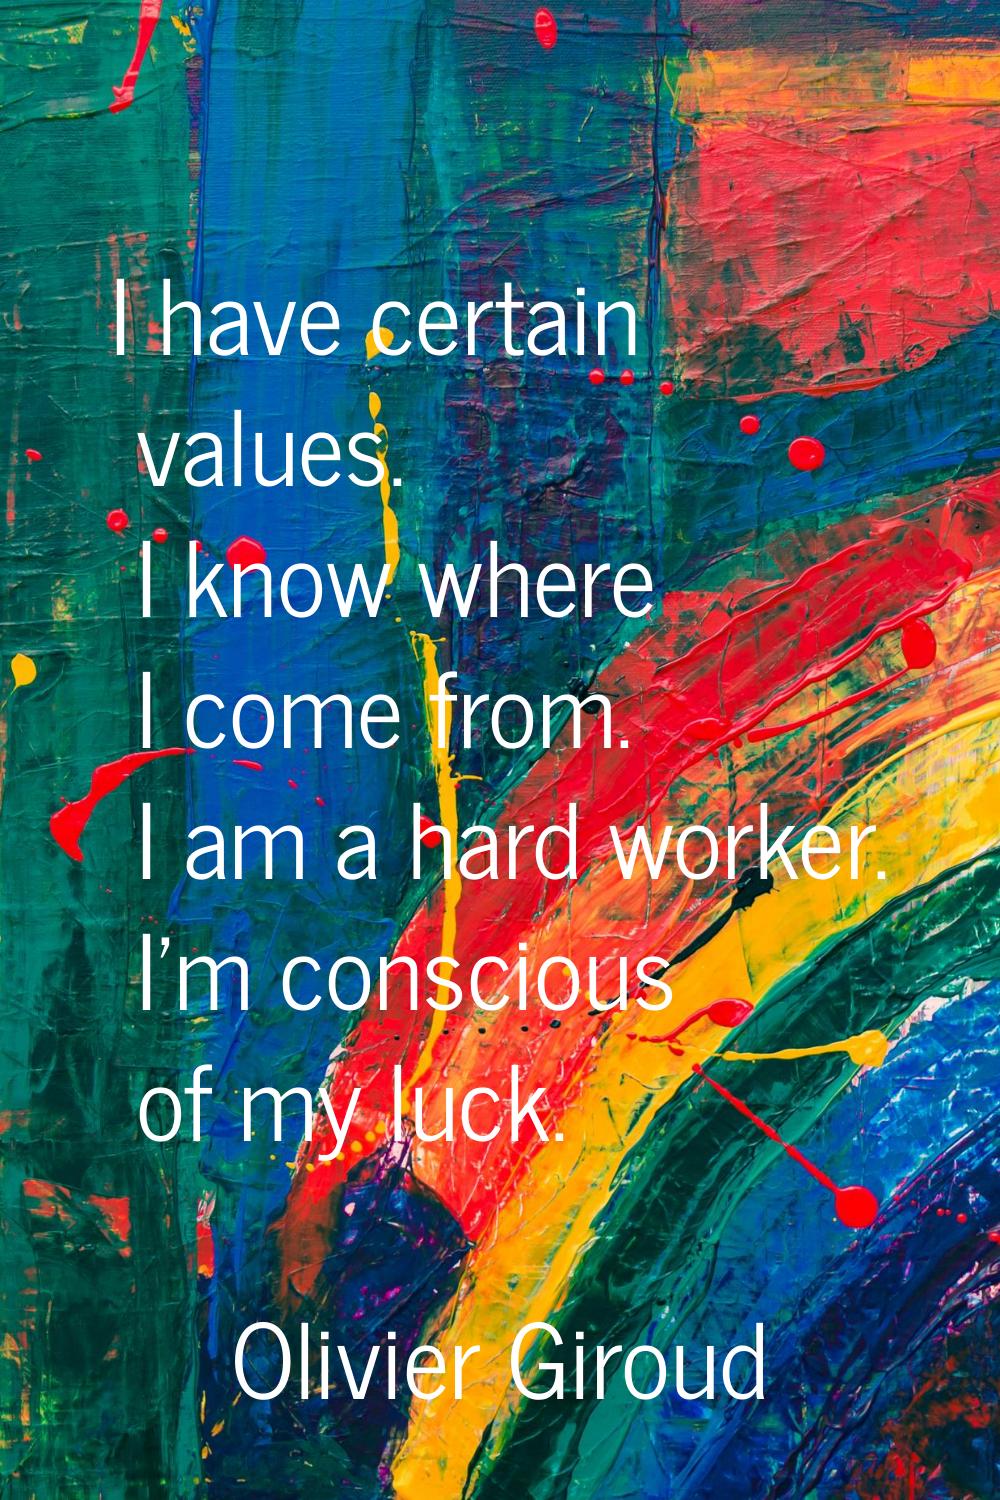 I have certain values. I know where I come from. I am a hard worker. I'm conscious of my luck.